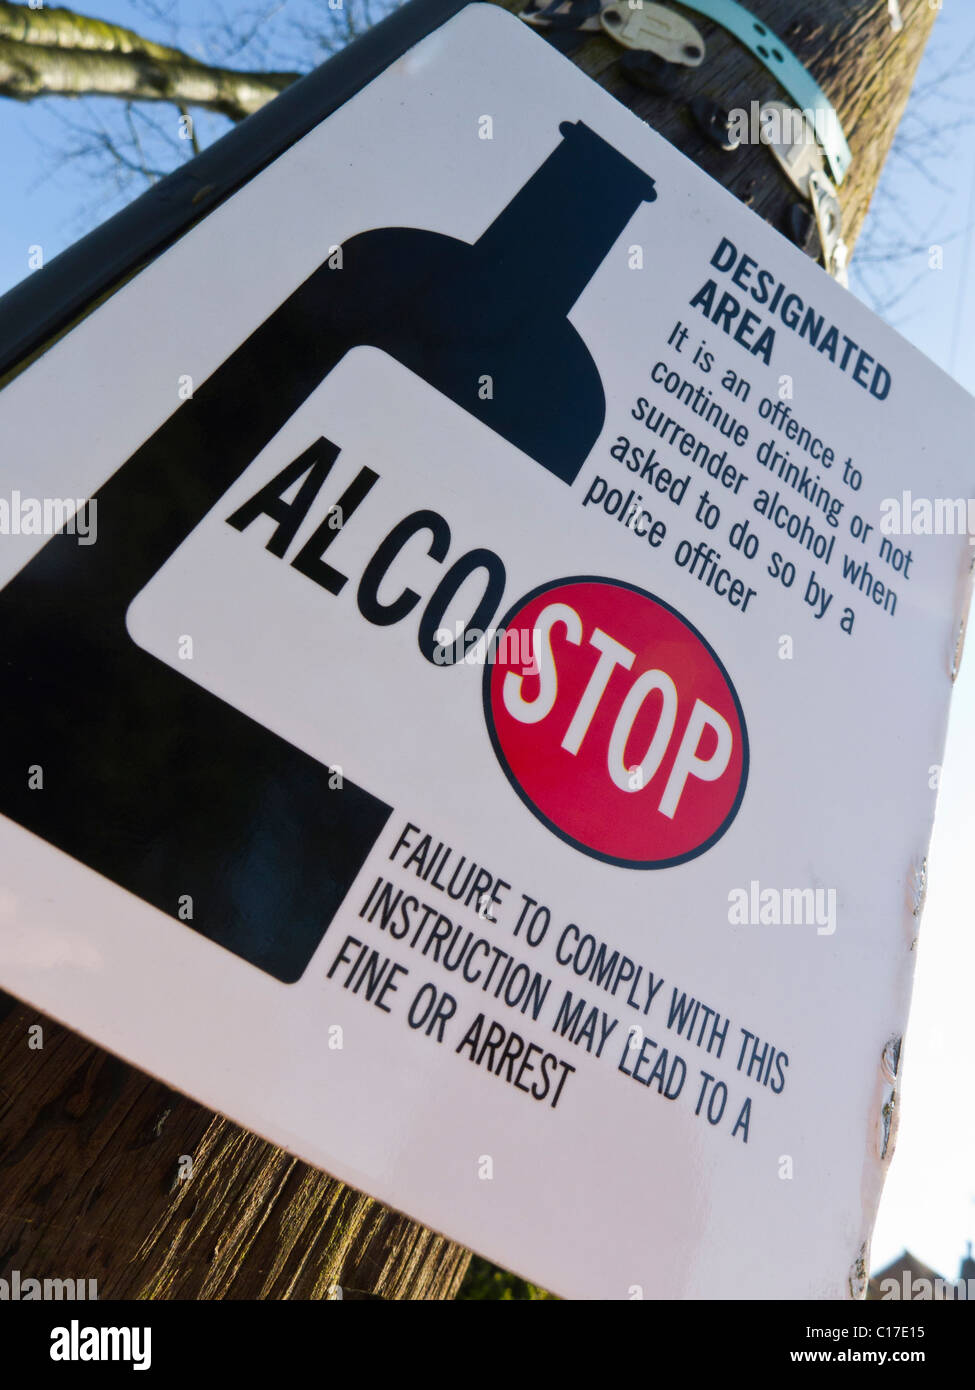 ALCO-STOP designated area sign instructing the public not to drink alcohol in this area. Stock Photo